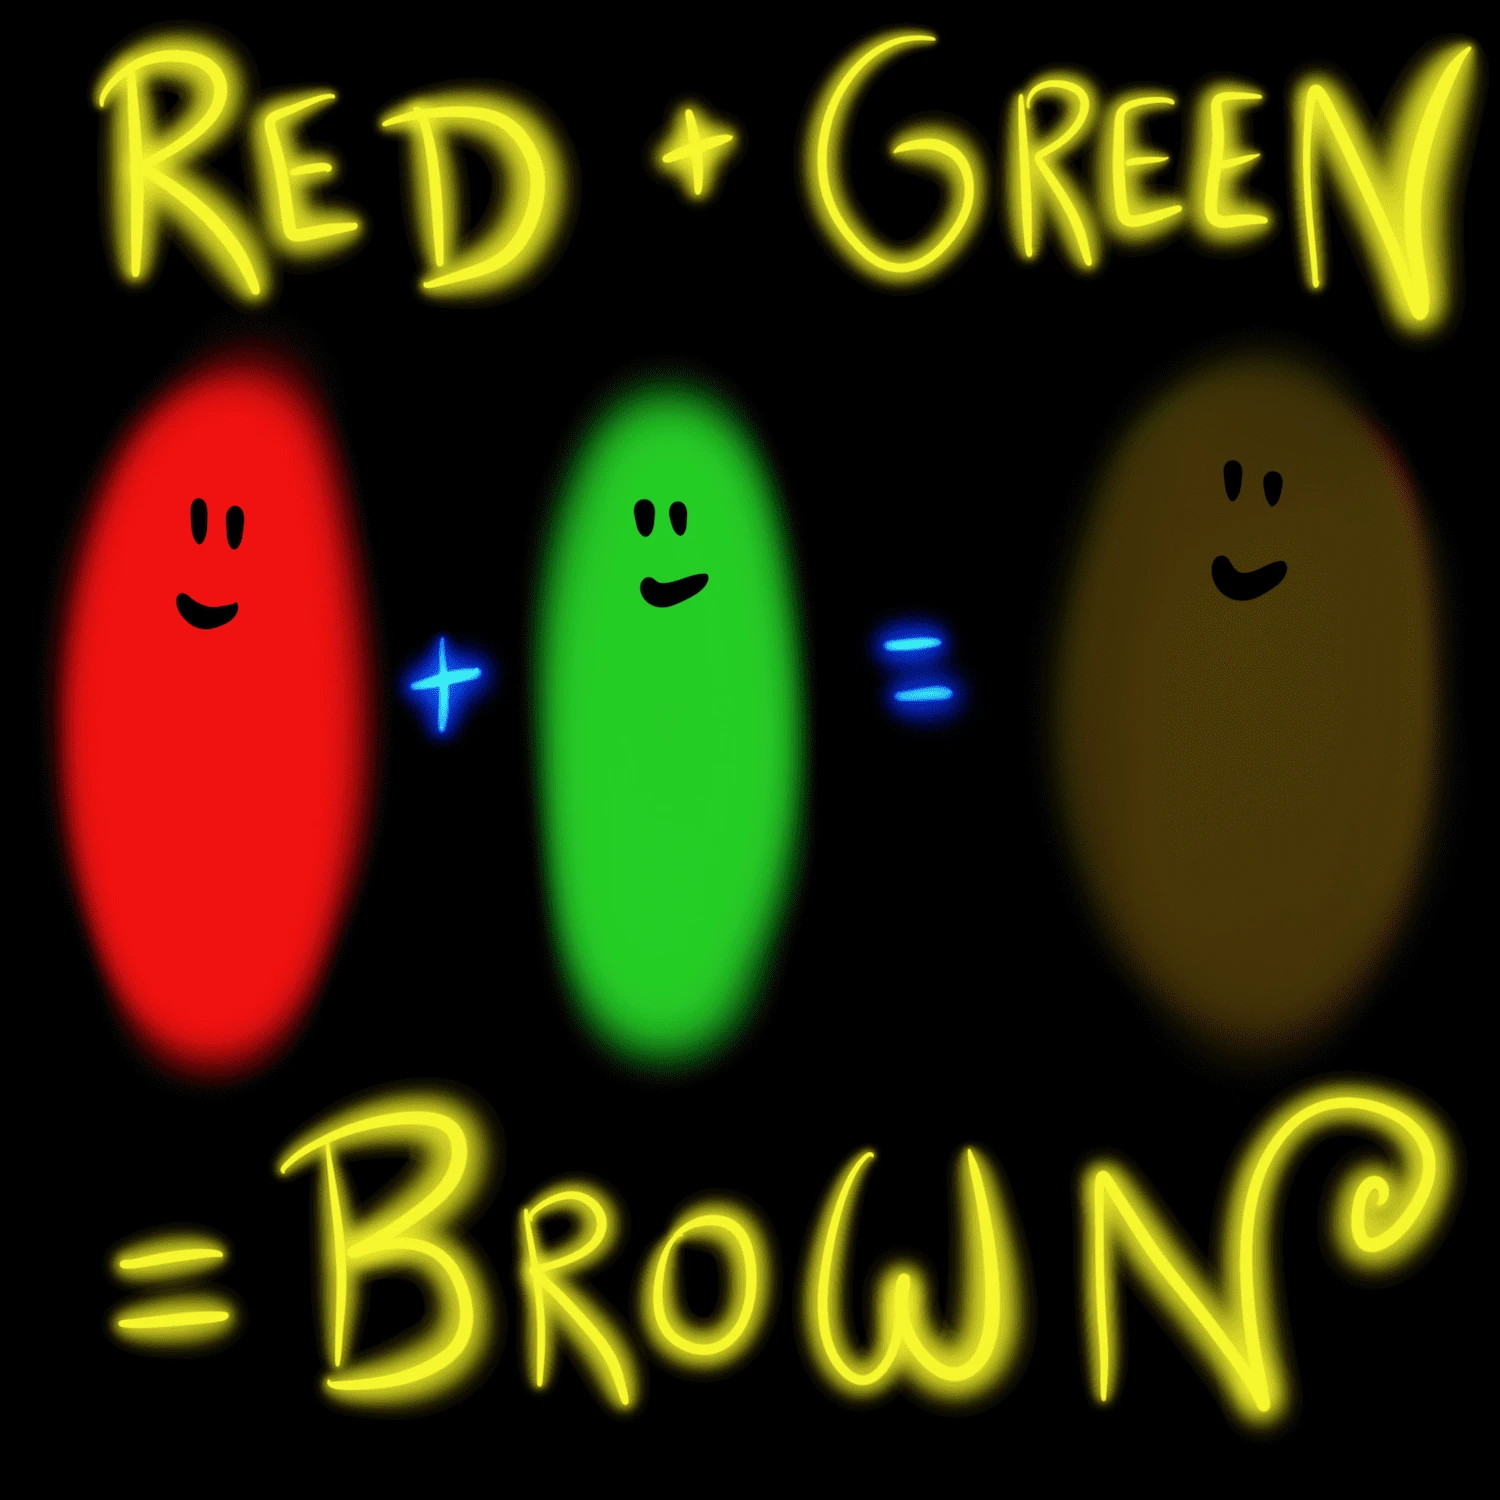 What Does Red and Green Make? - Drawings Of